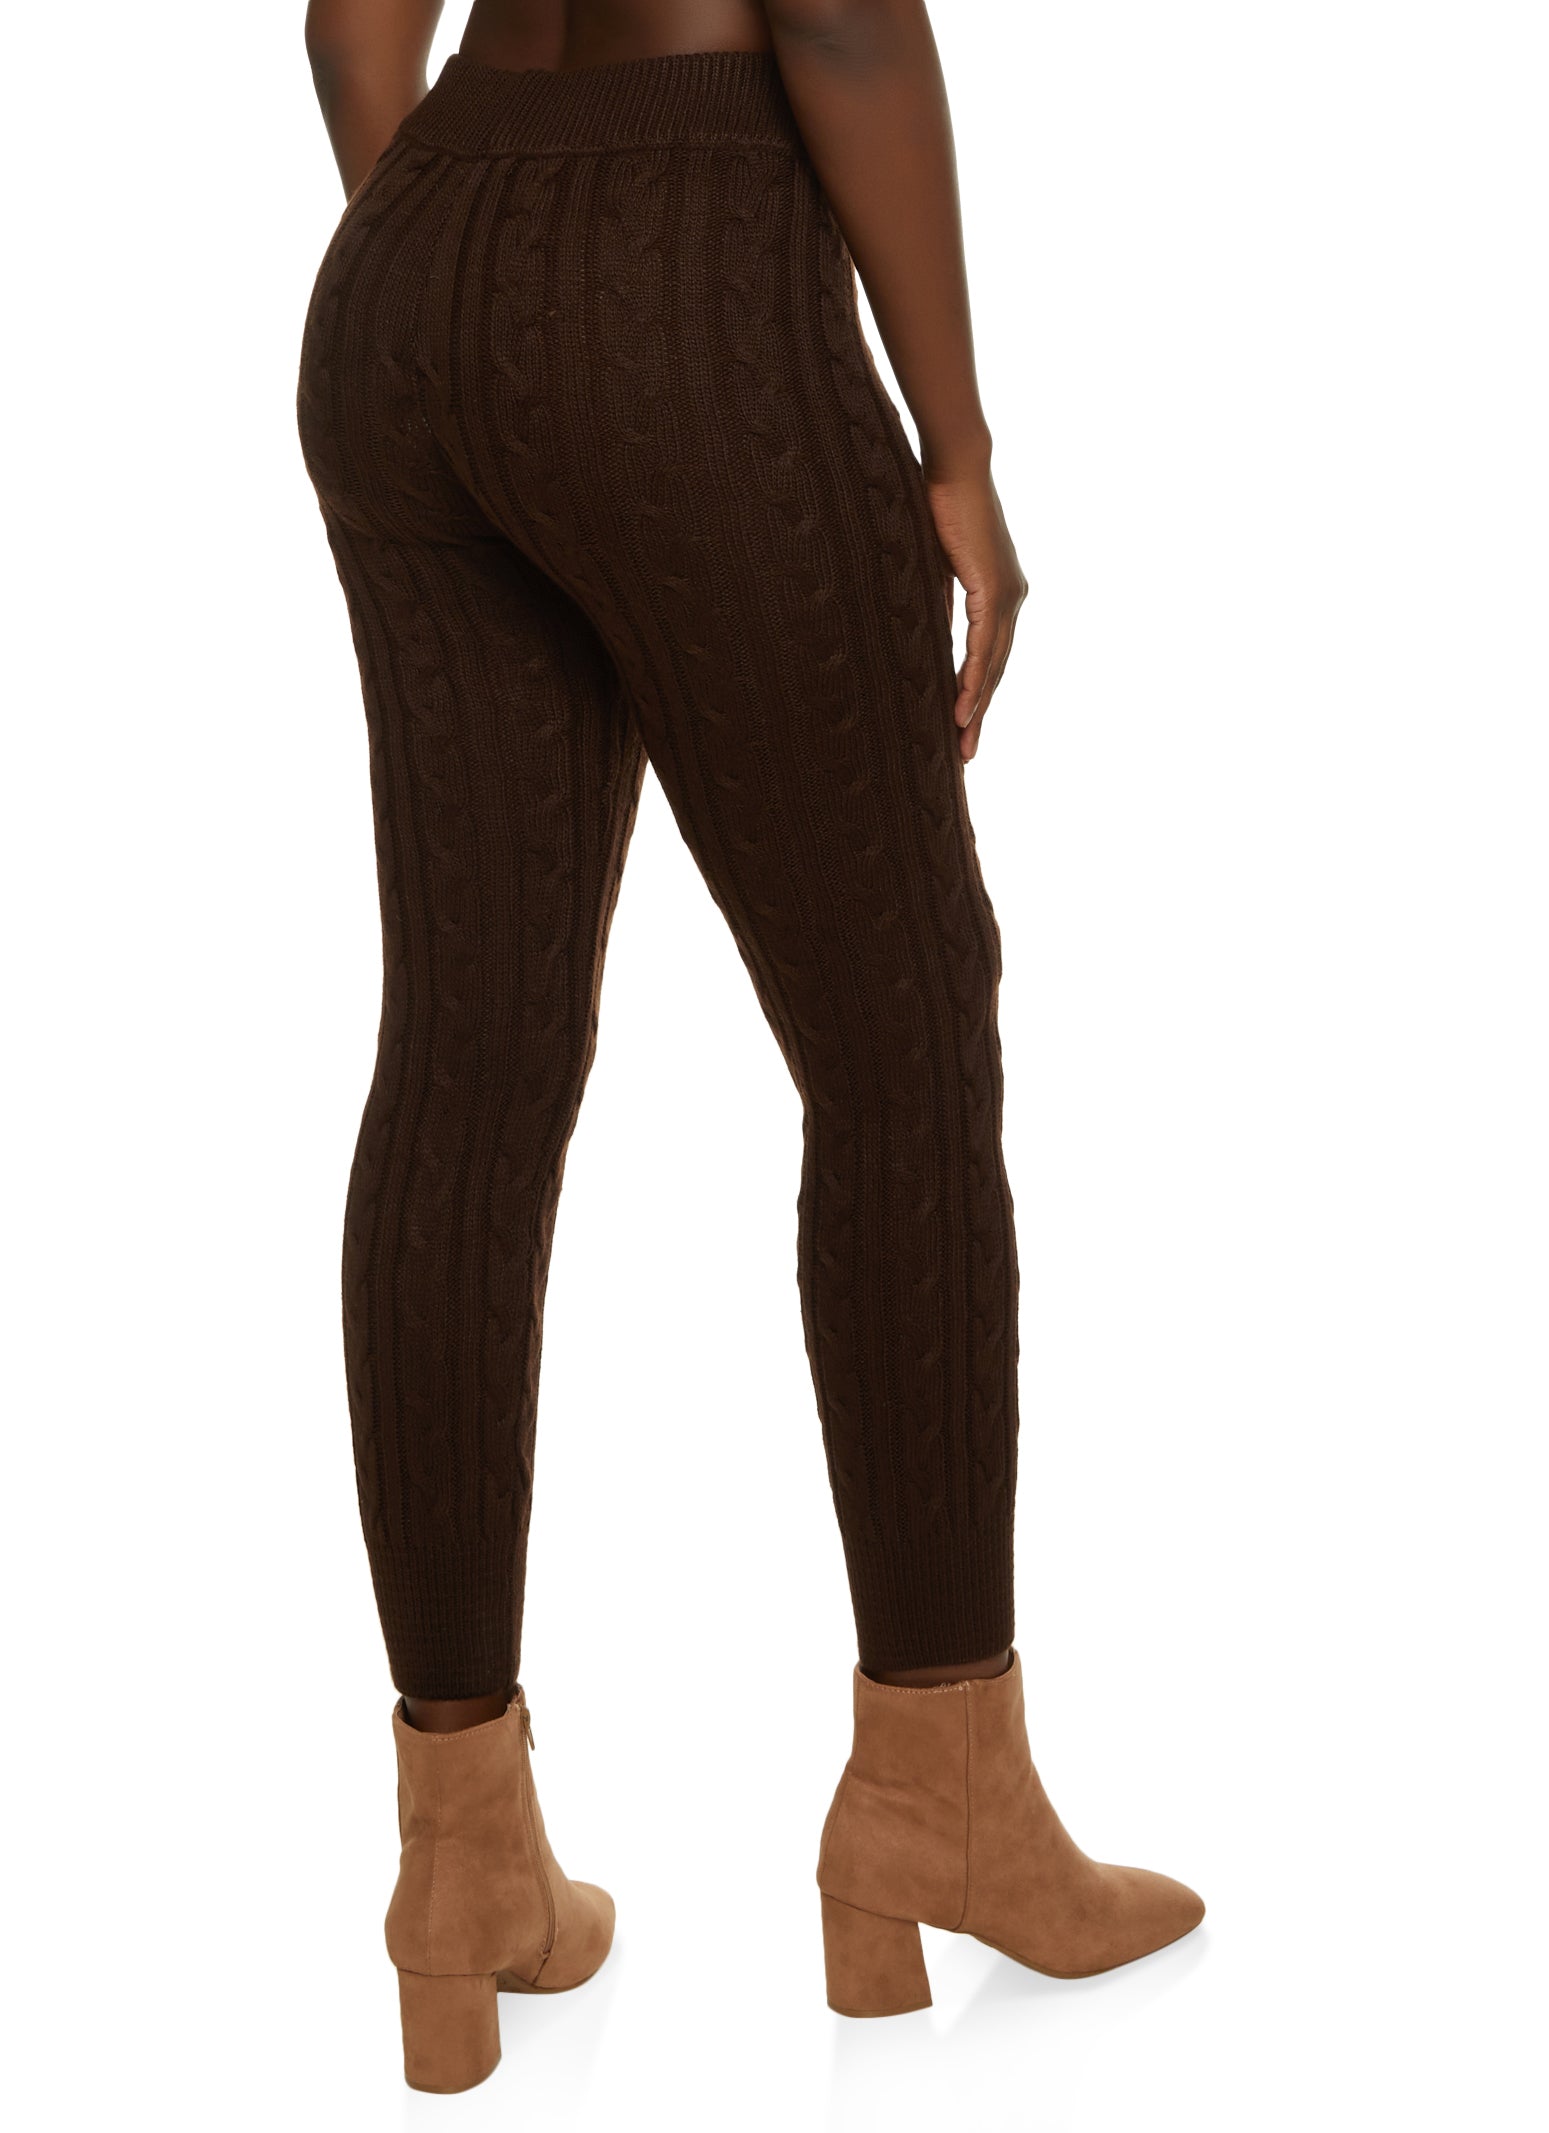 Cable Knit Full Length Ribbed Thick Warm Ladies Womens Leggings Pants